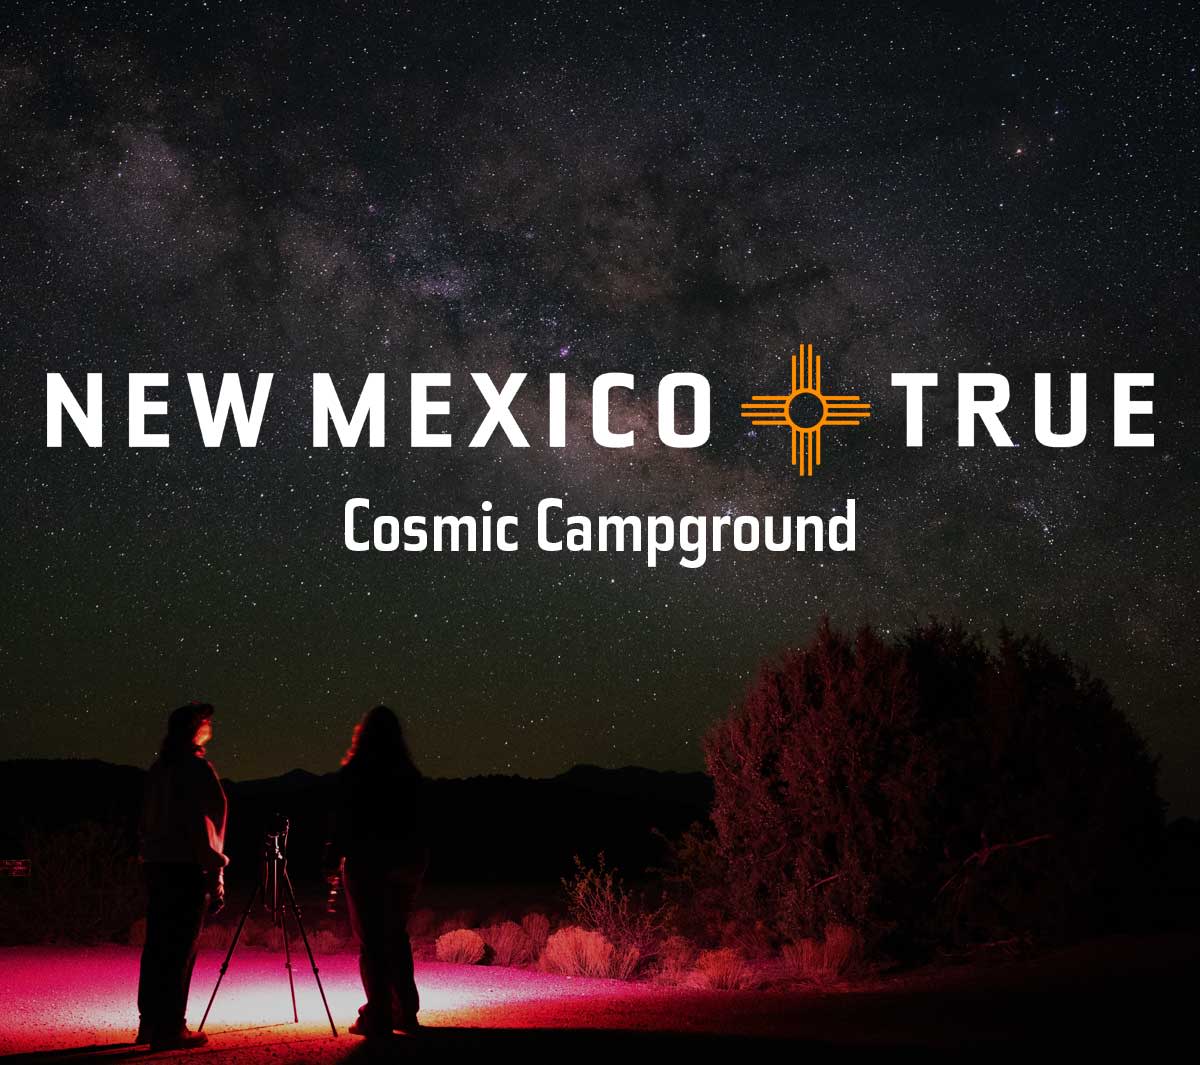 Cosmic Campground